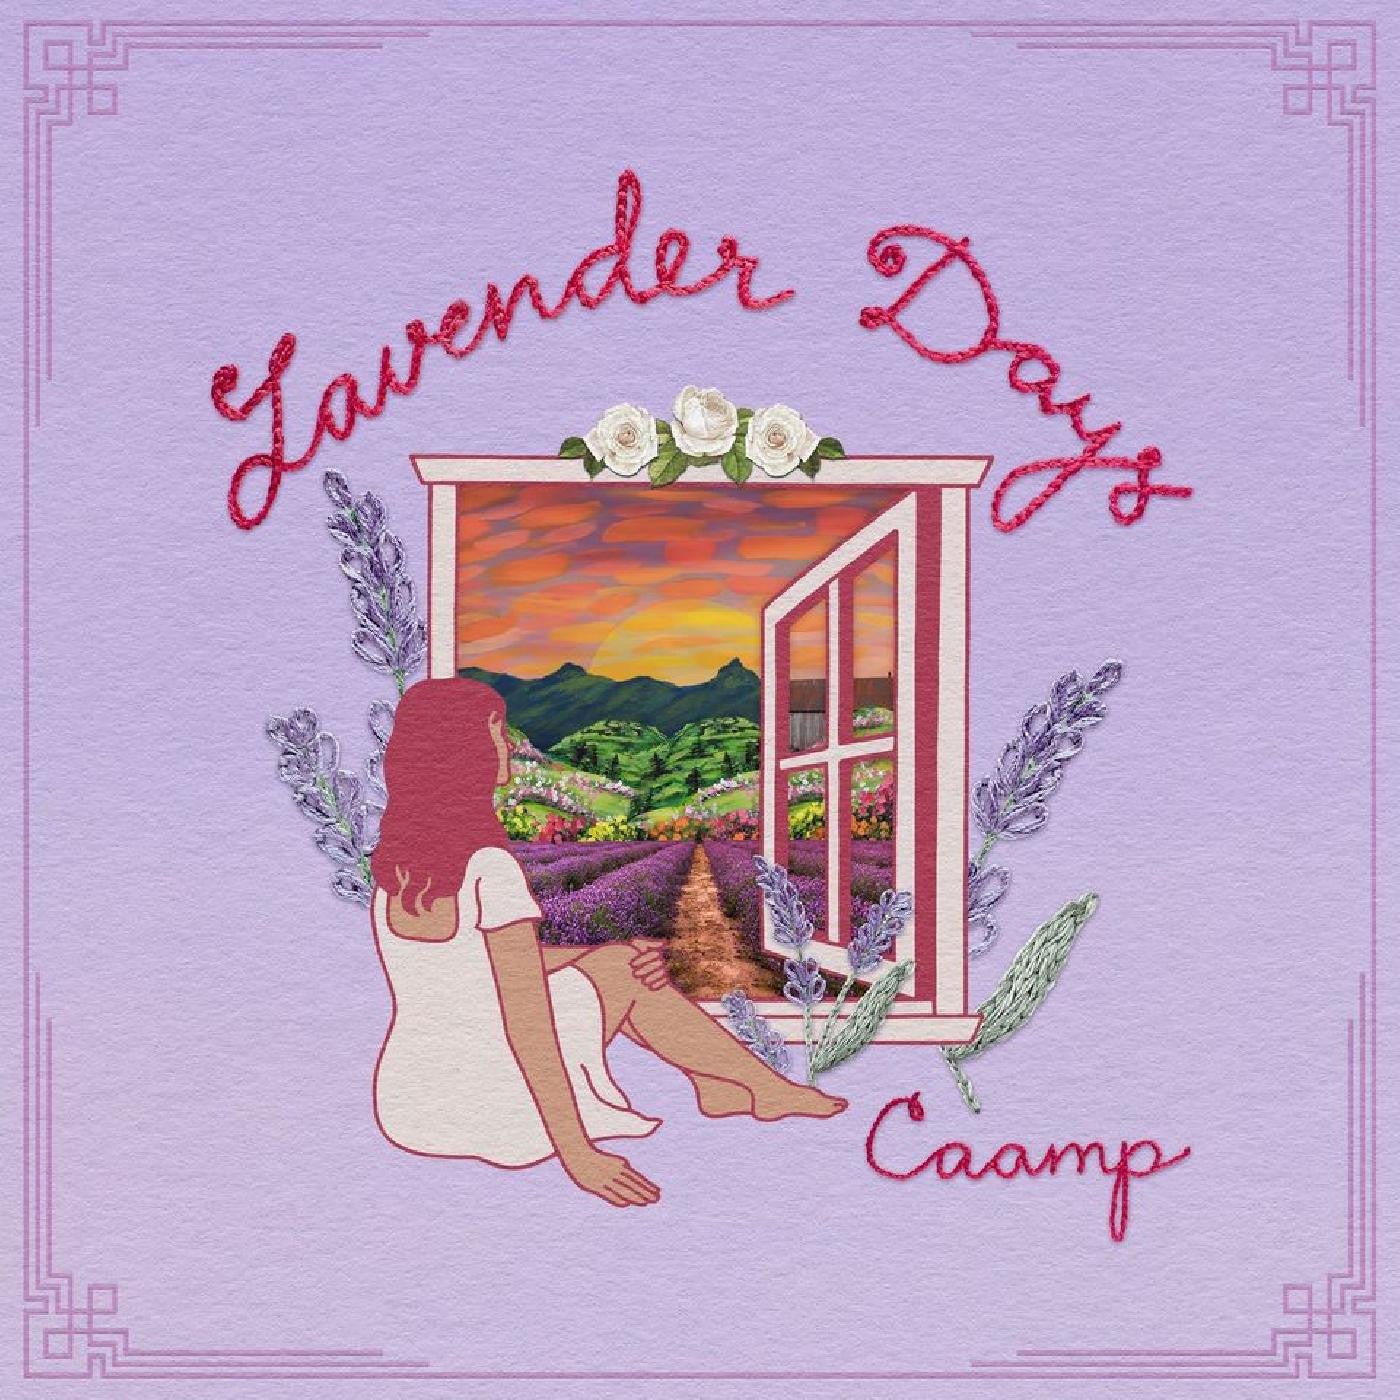 Caamp - Lavender Days (Pink and Purple Galaxy Swirl Vinyl) - 810090090542 - LP's - Yellow Racket Records